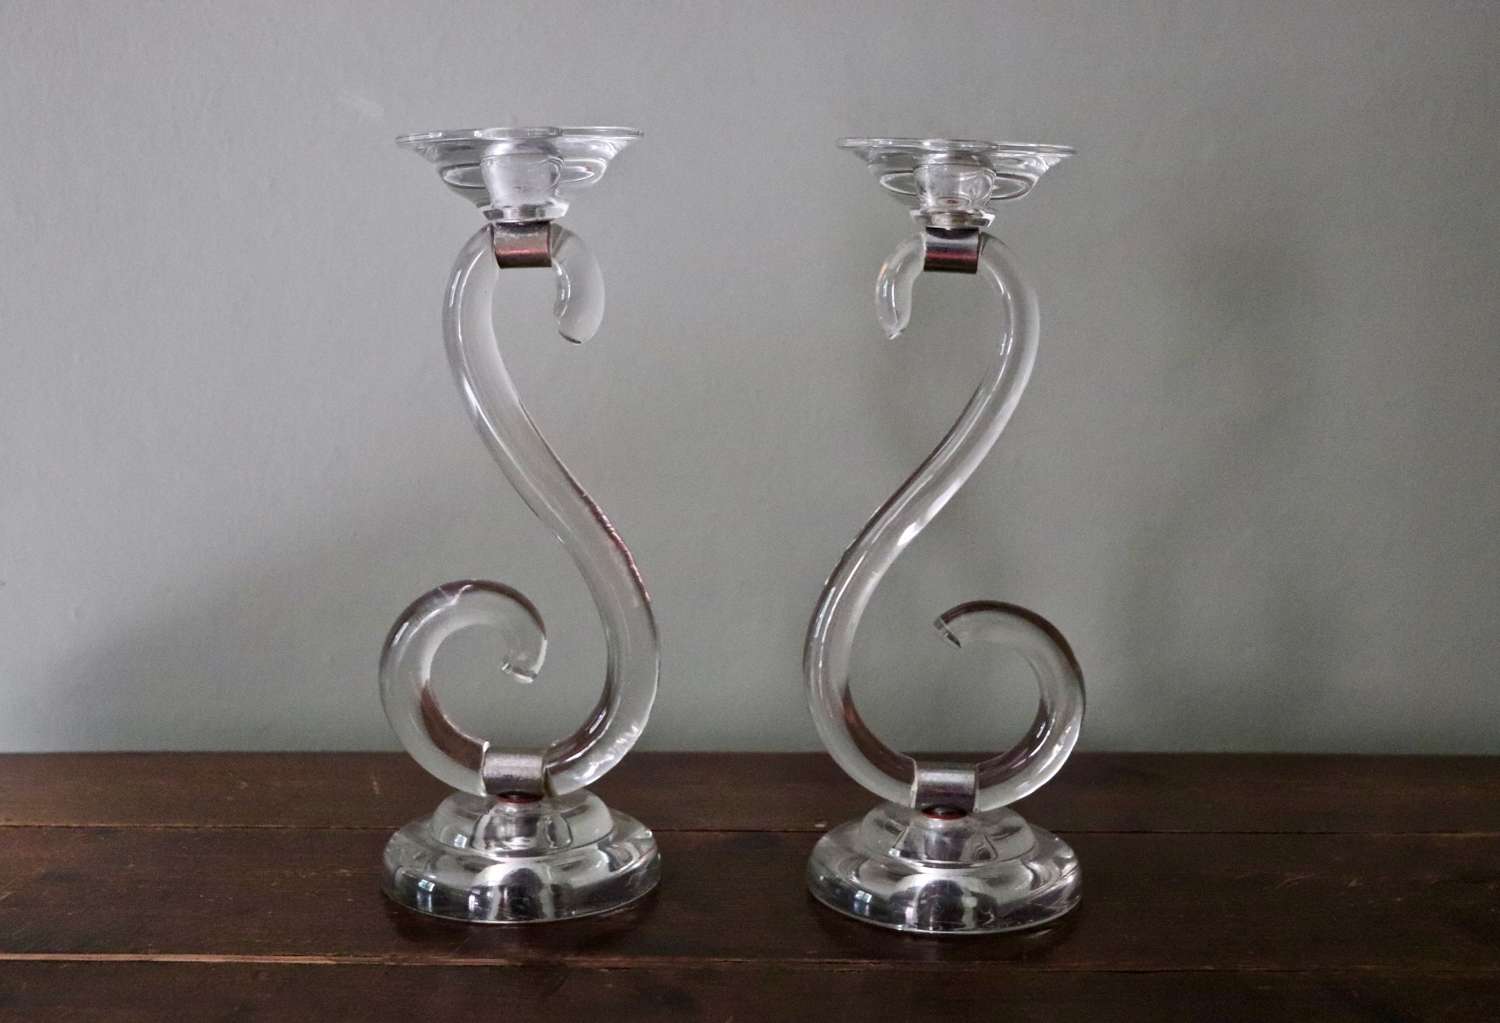 Pair of Art Deco inspired mid century s shaped candlesticks